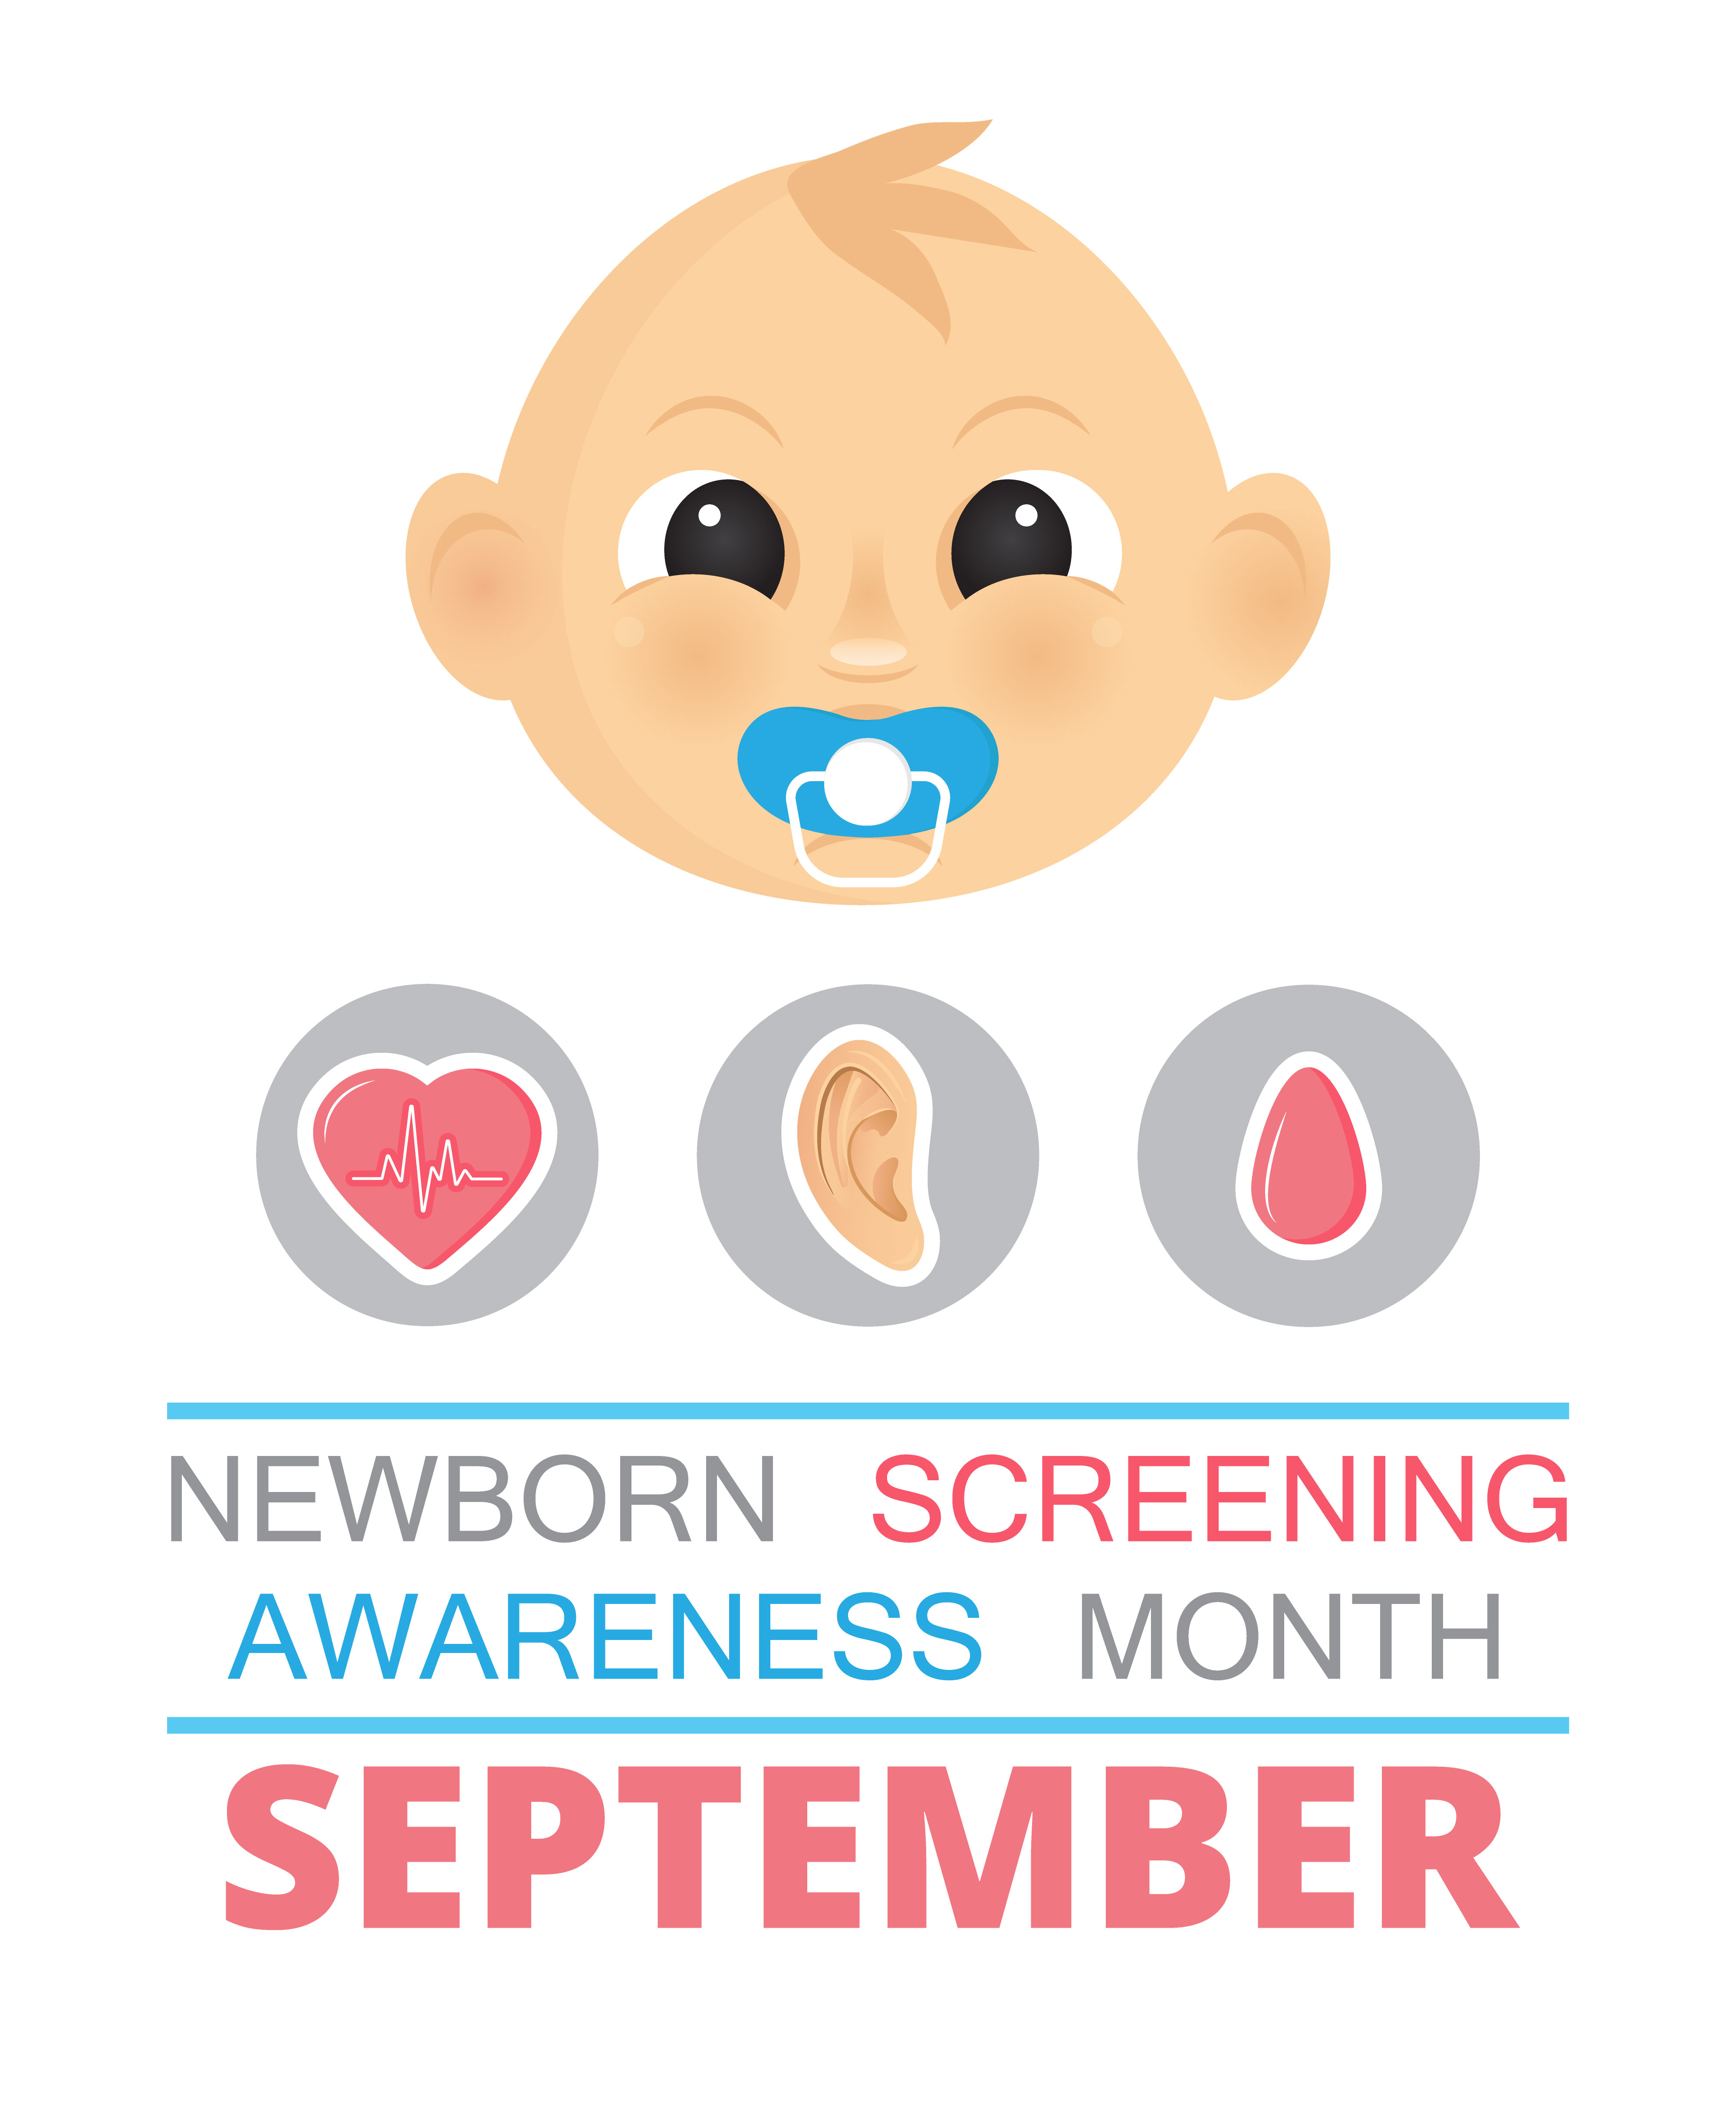 Screening: Baby's first test